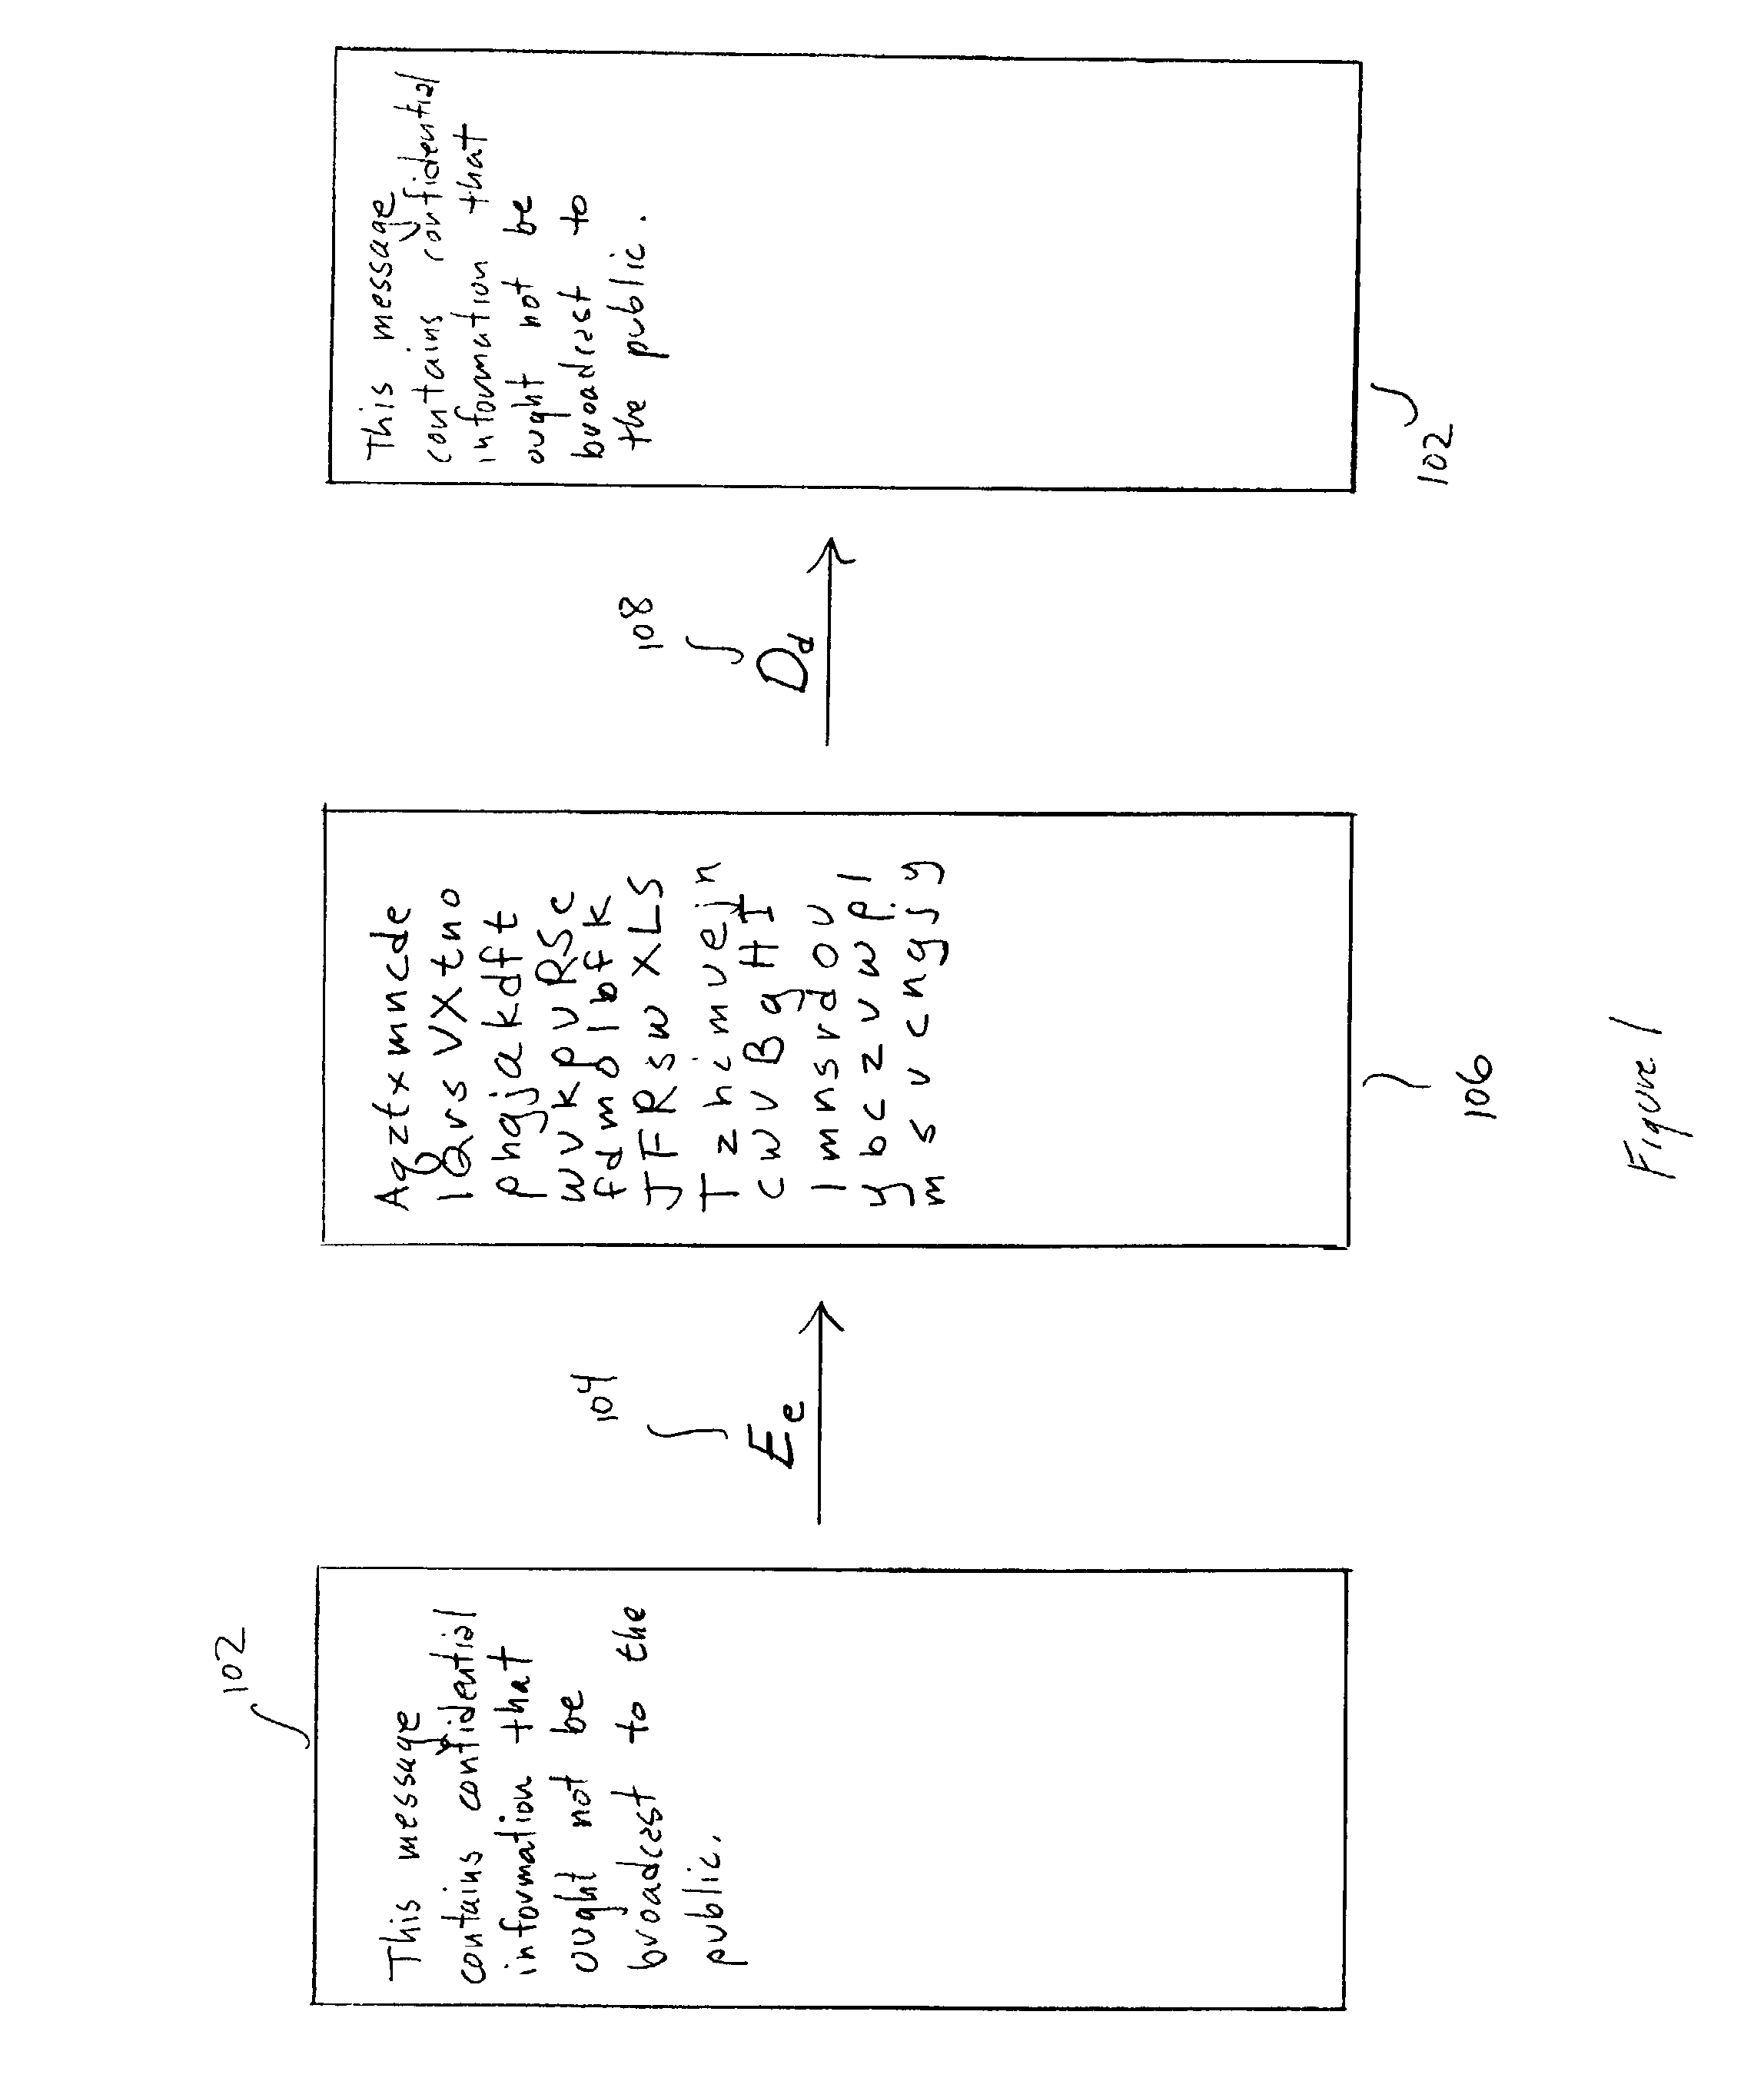 Method for upgrading a host/agent security system that includes digital certificate management and an upgradable backward compatible host/agent security system digital certificate infrastructure